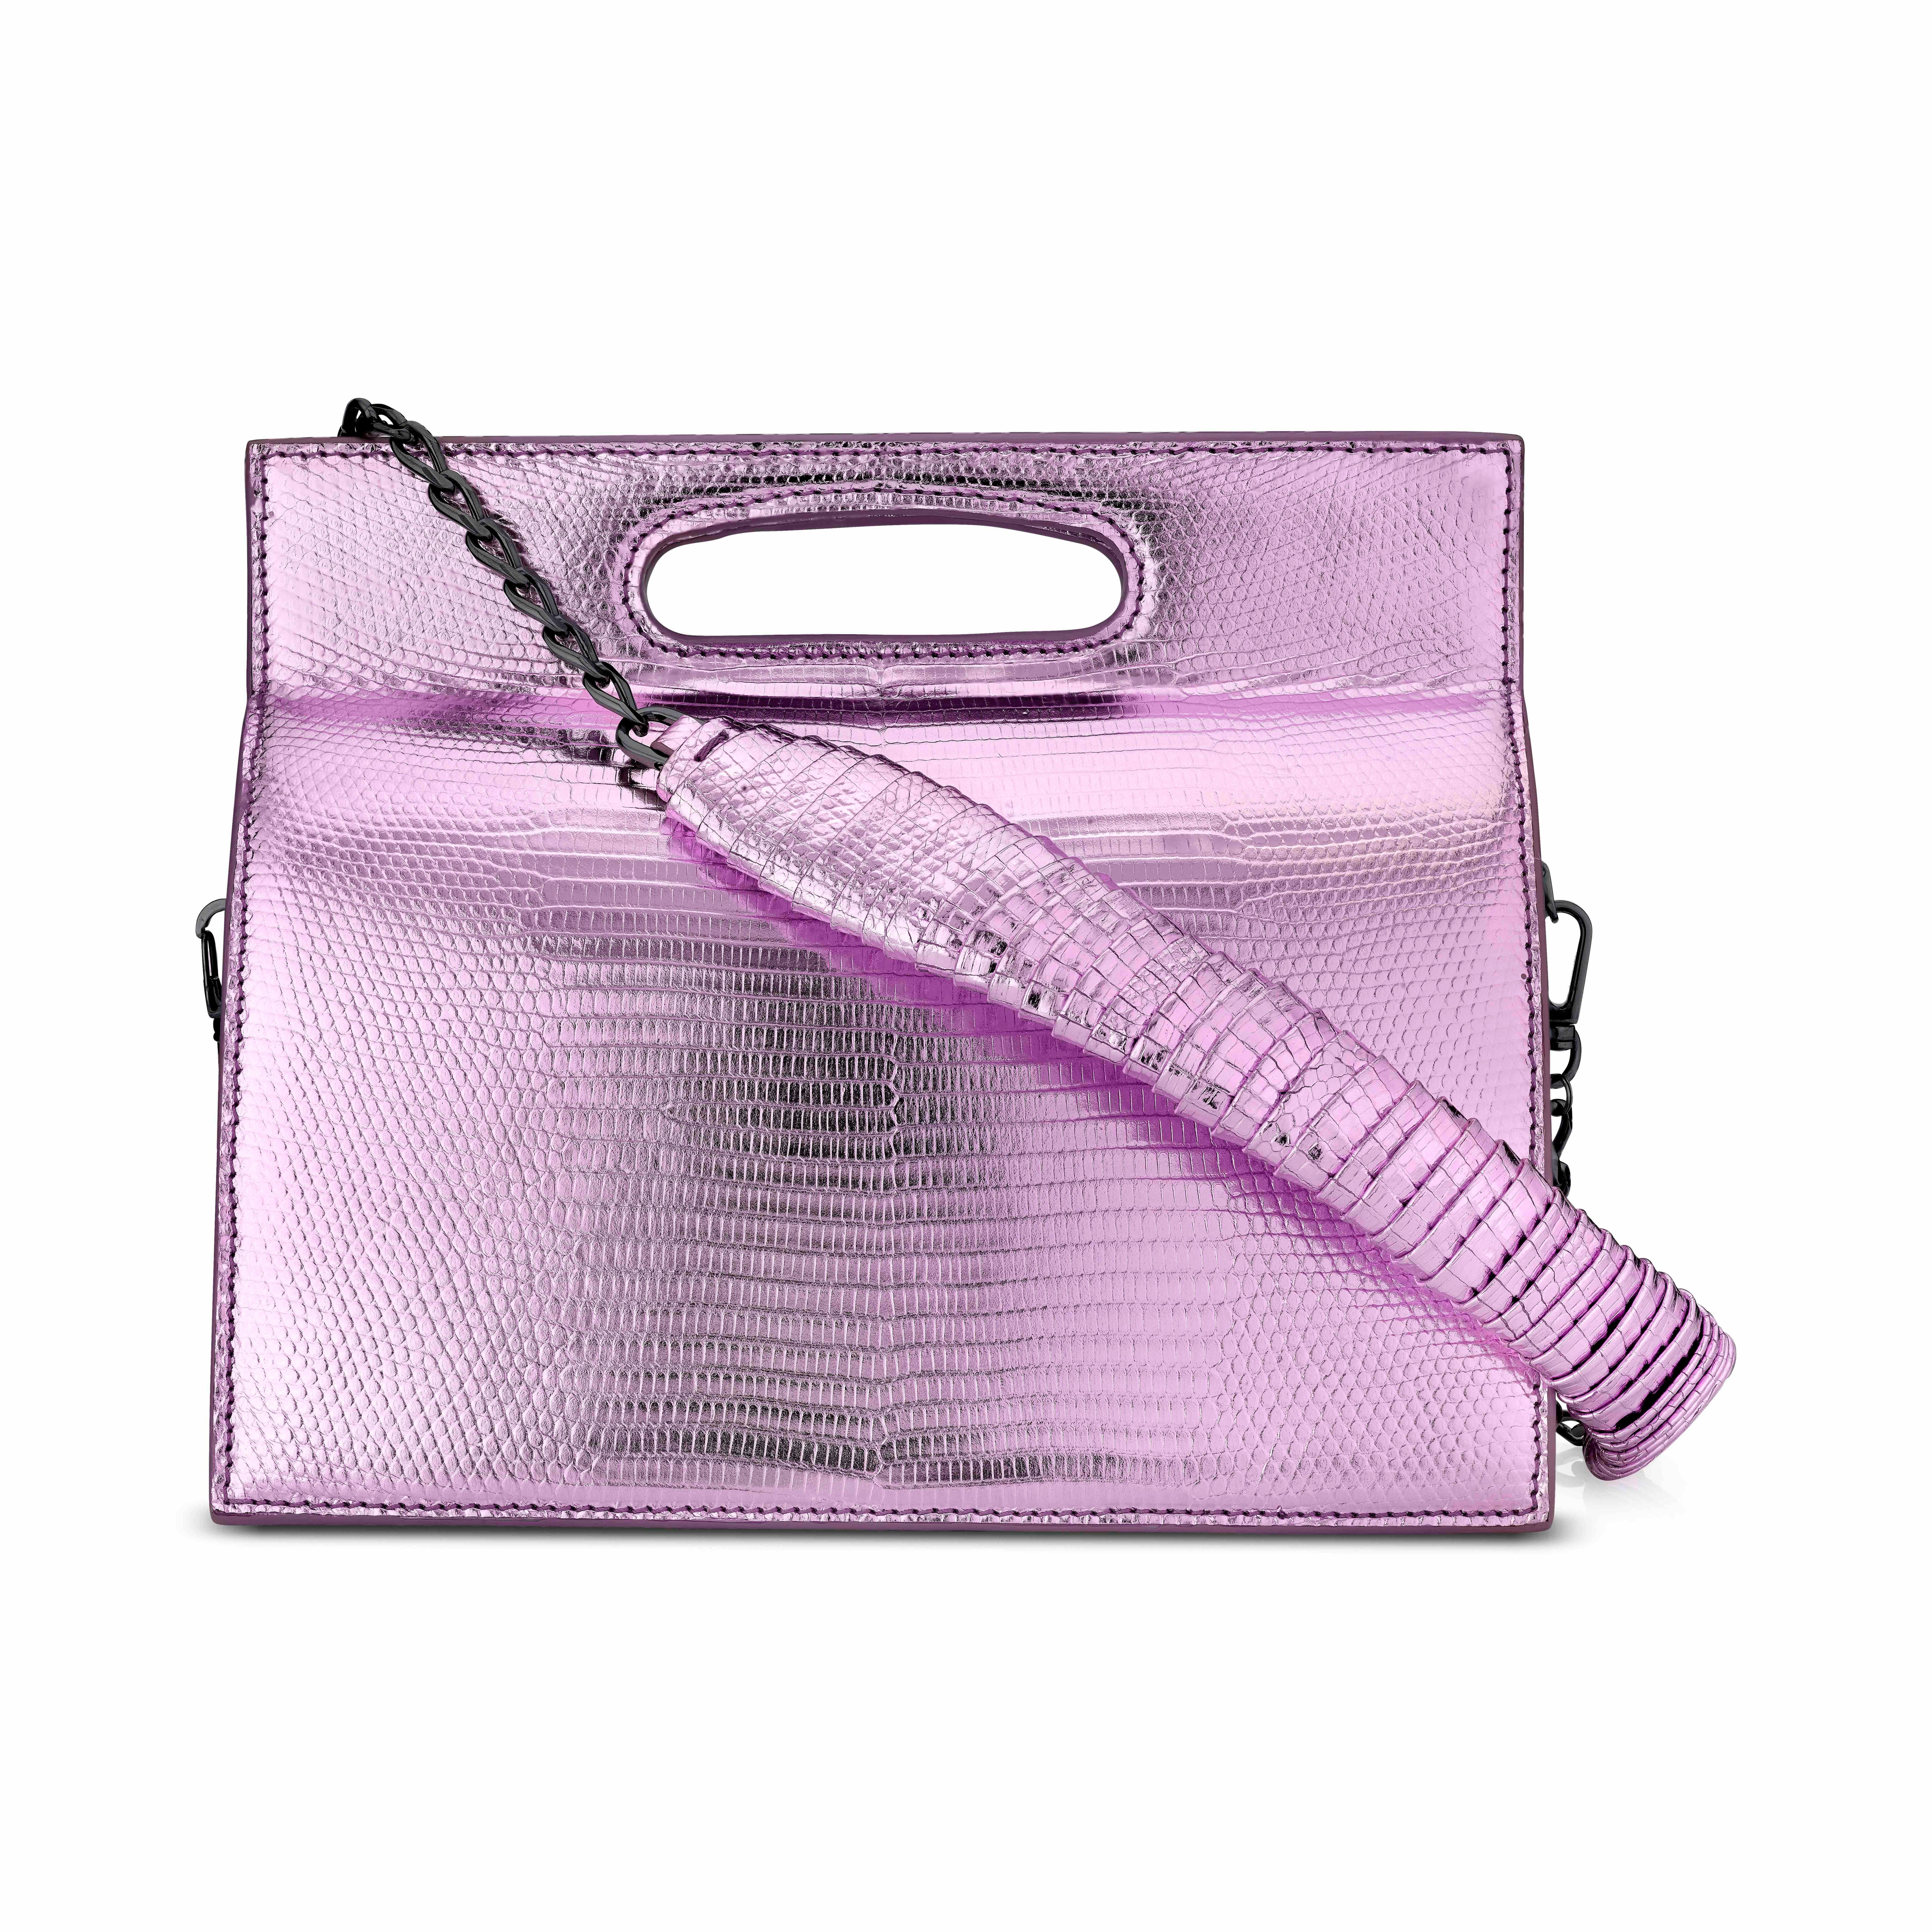 The Stella in Electric Rose Lizard is a structured tri-compartment handbag with a magnetic closure and an optional gunmetal cross-body chain with a matching lizard-wrapped accent. It fits the large iPhone, has custom exterior metal detailing,